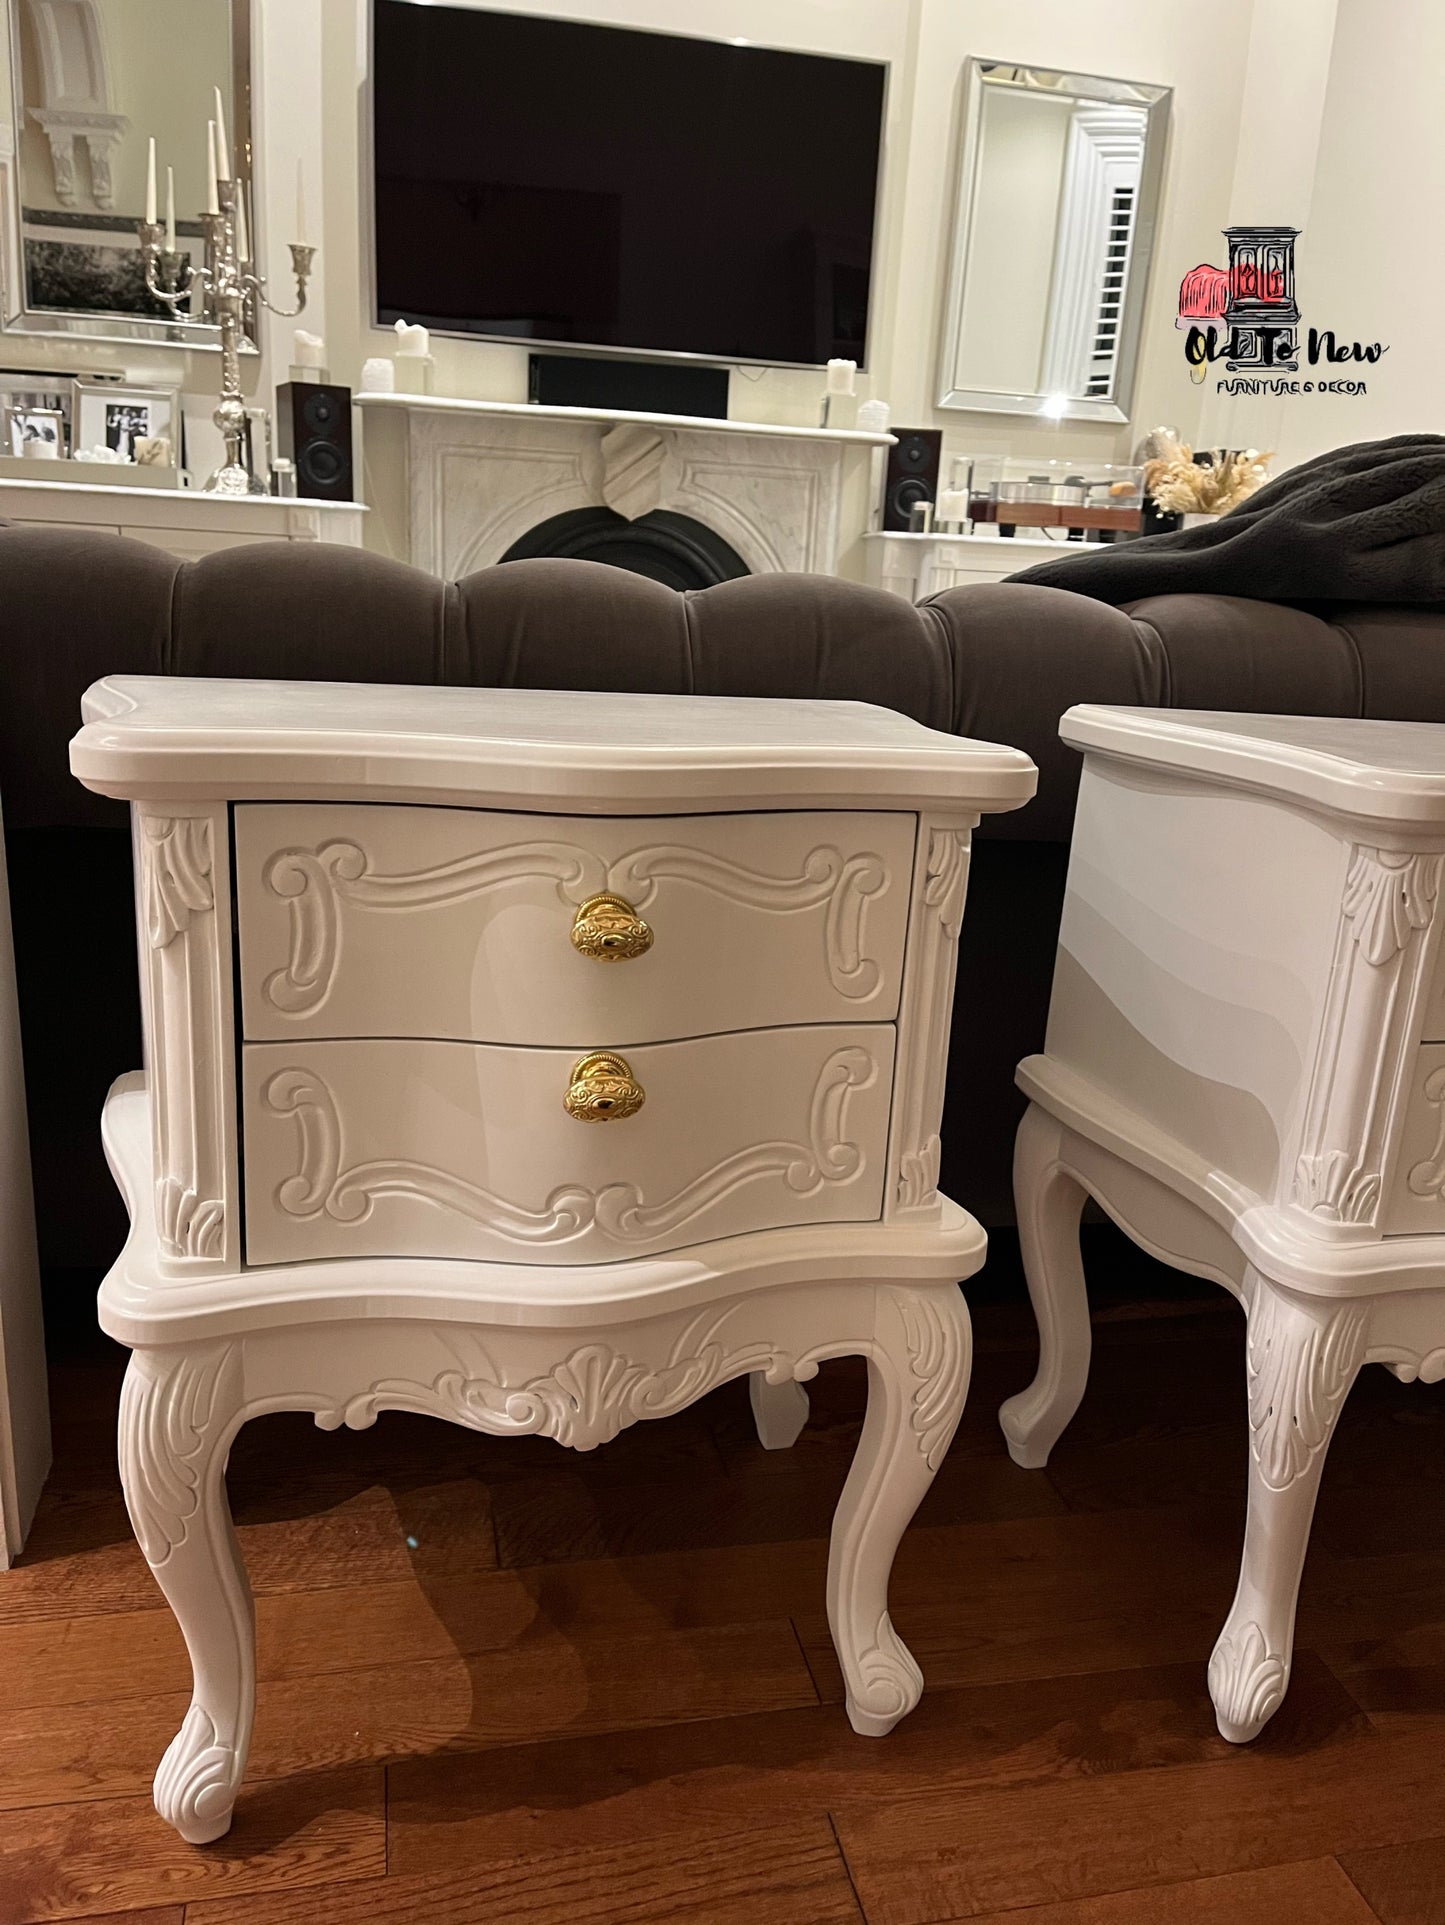 Customer picture, ornate bedside tables; Old to New Furniture & Decor